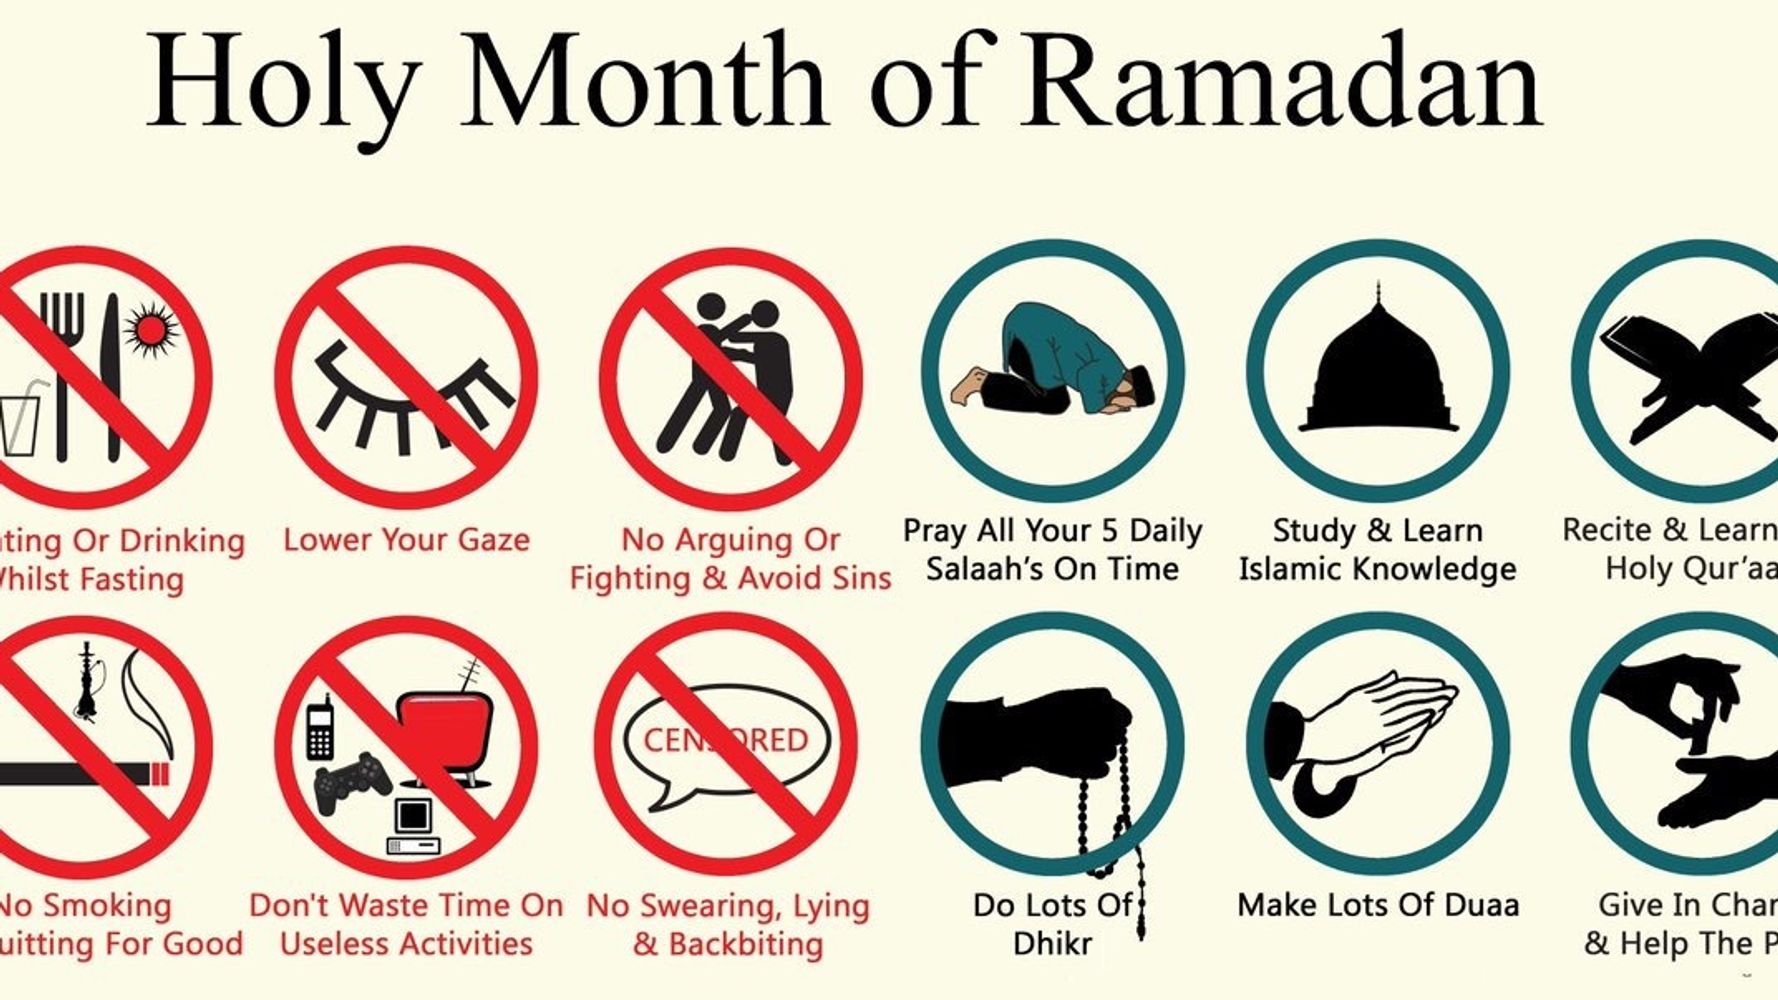 Why Do Muslims Fast In The Month Of Ramadan?